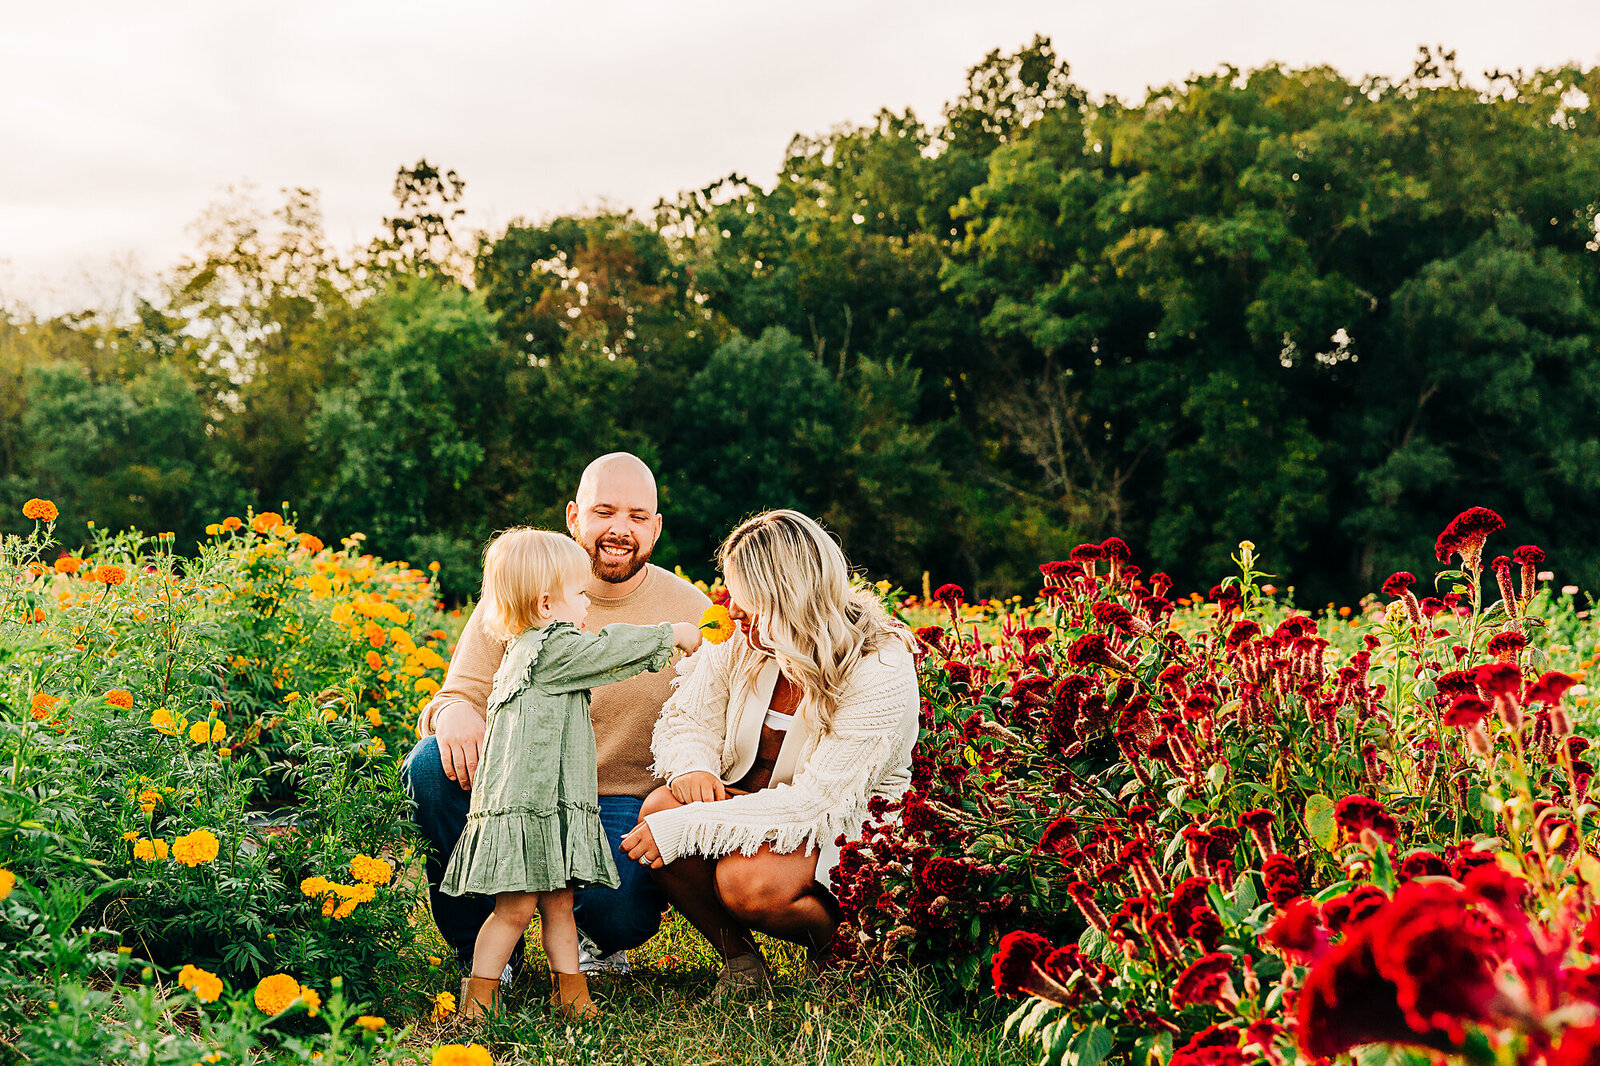 parents squatting down with little girl smelling flowers